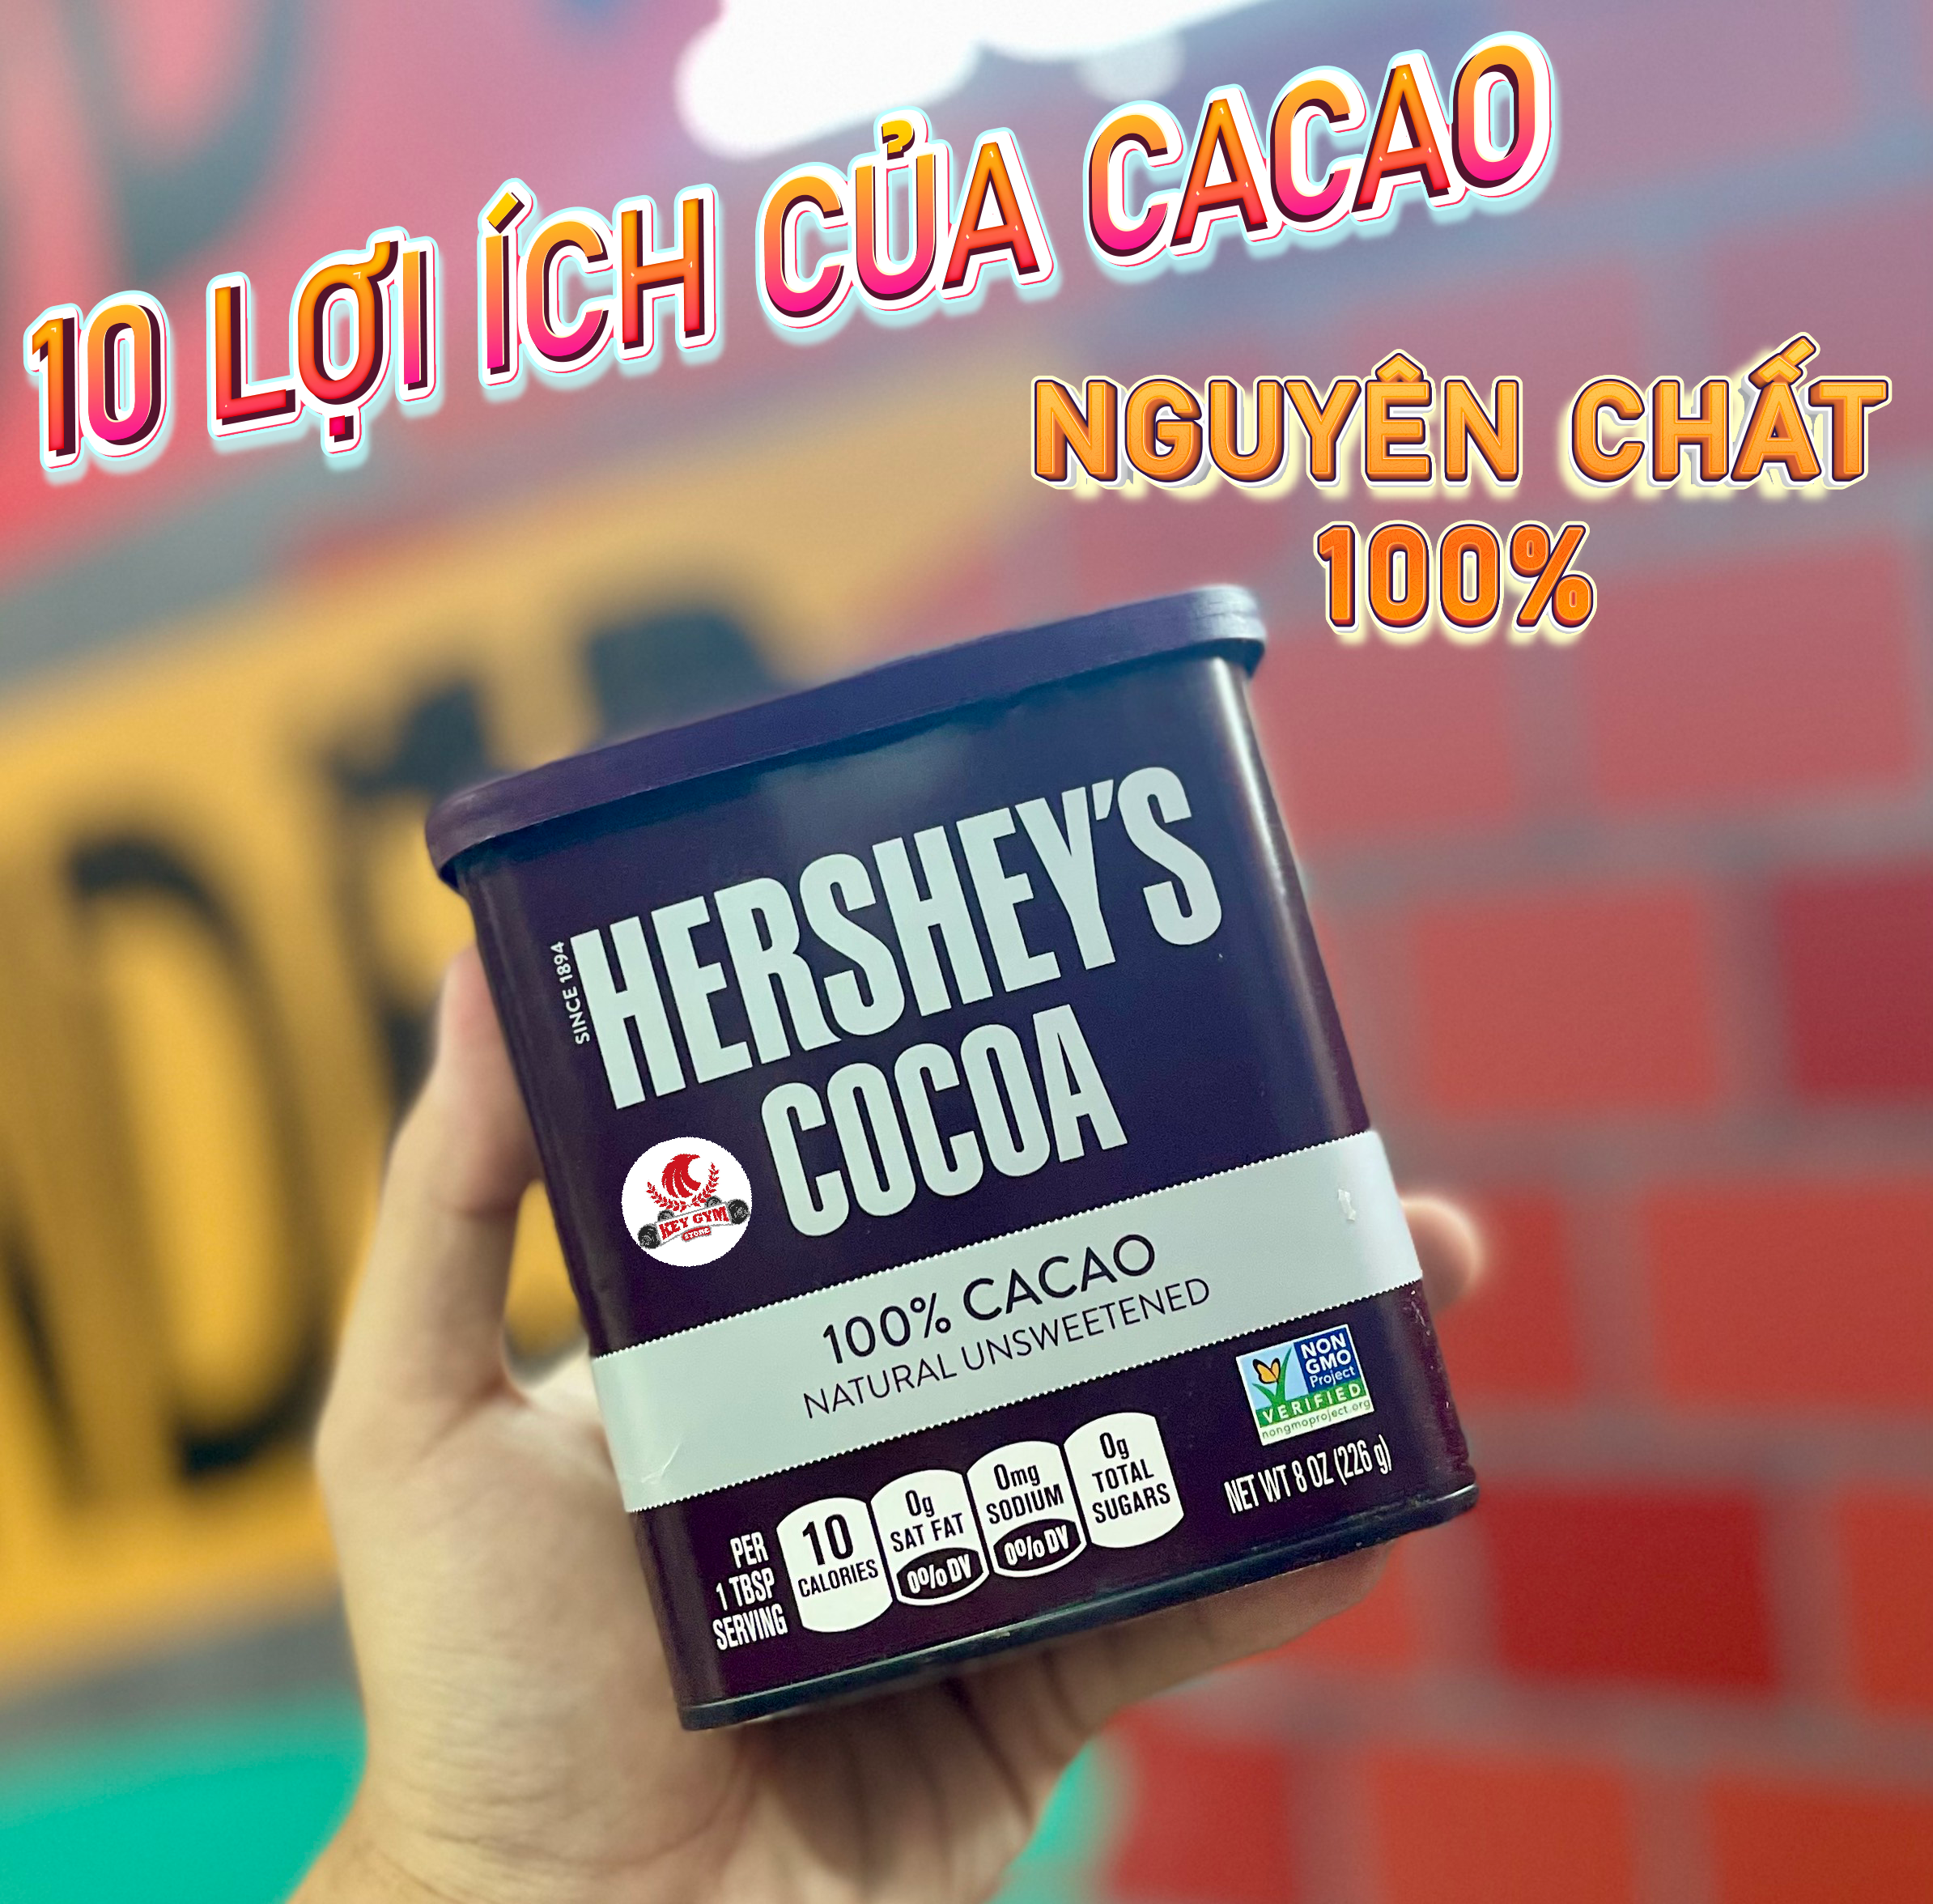 Bột Cacao Hershey's Cocoa